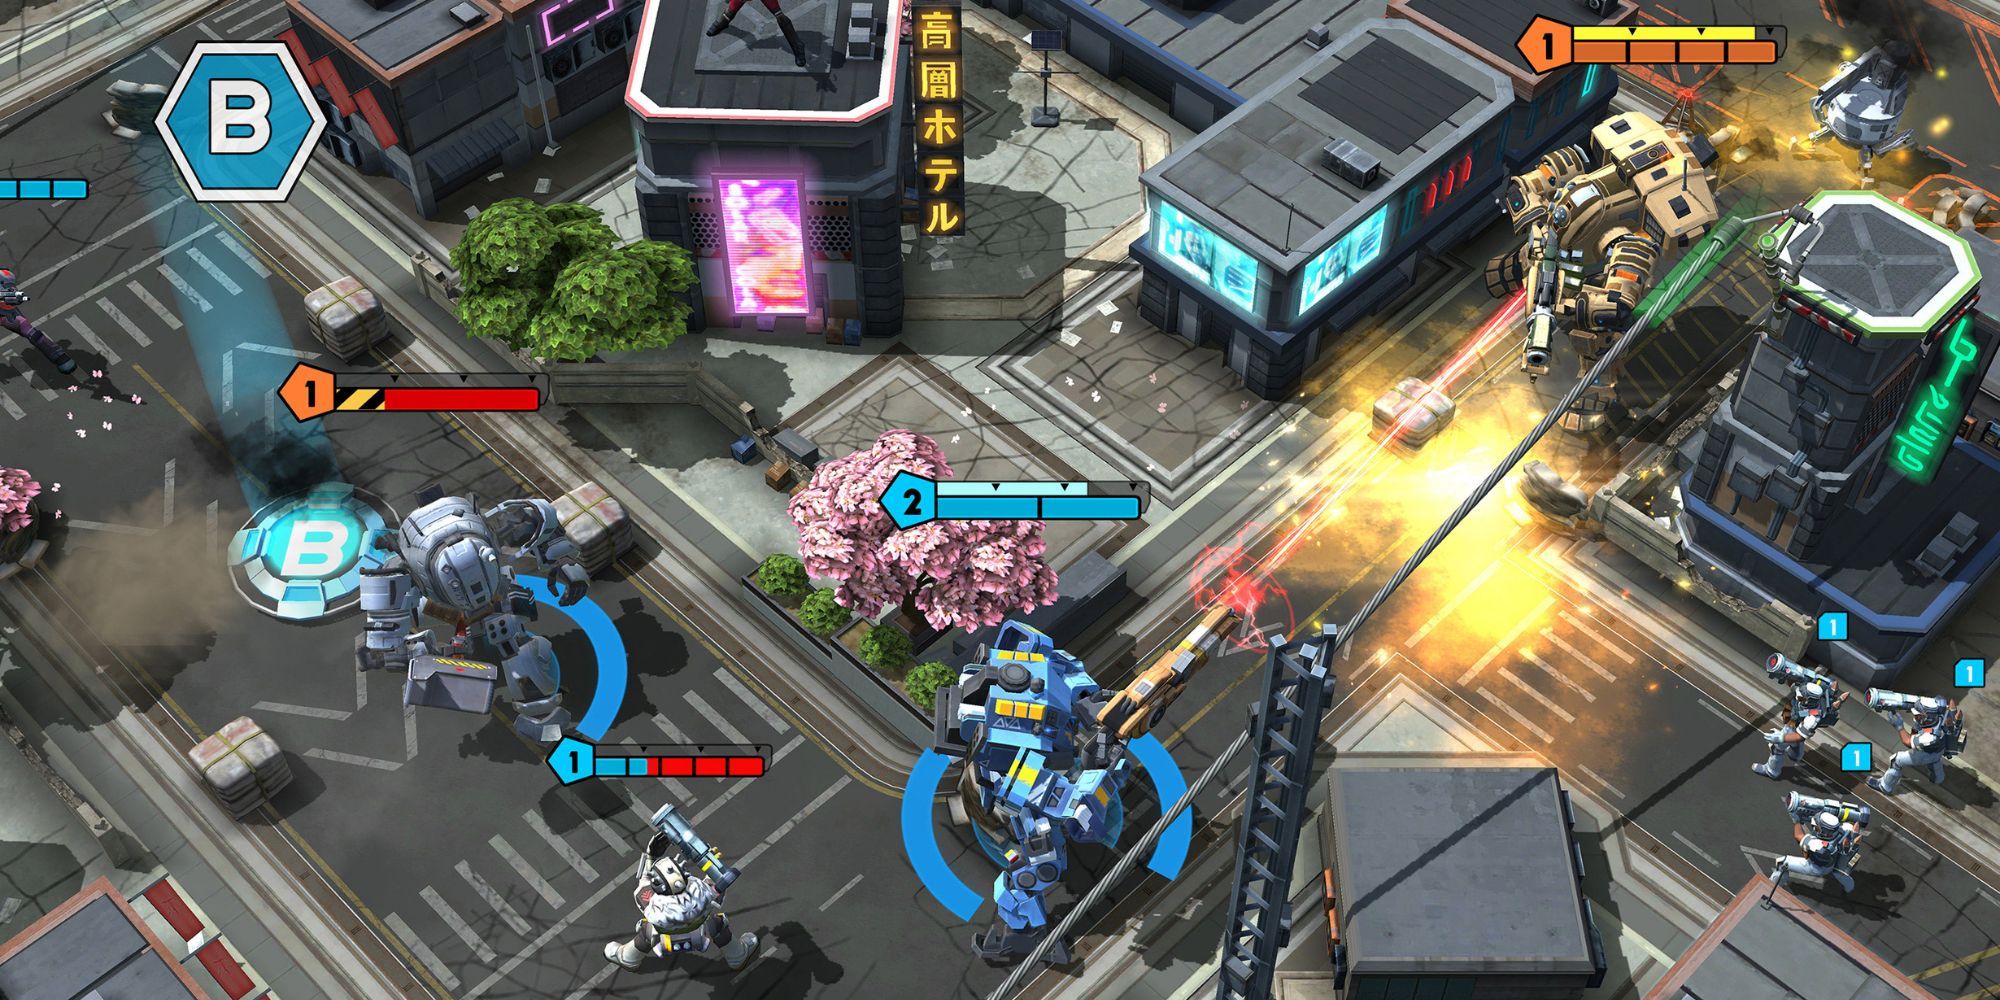 A player attacking in Titanfall: Assault